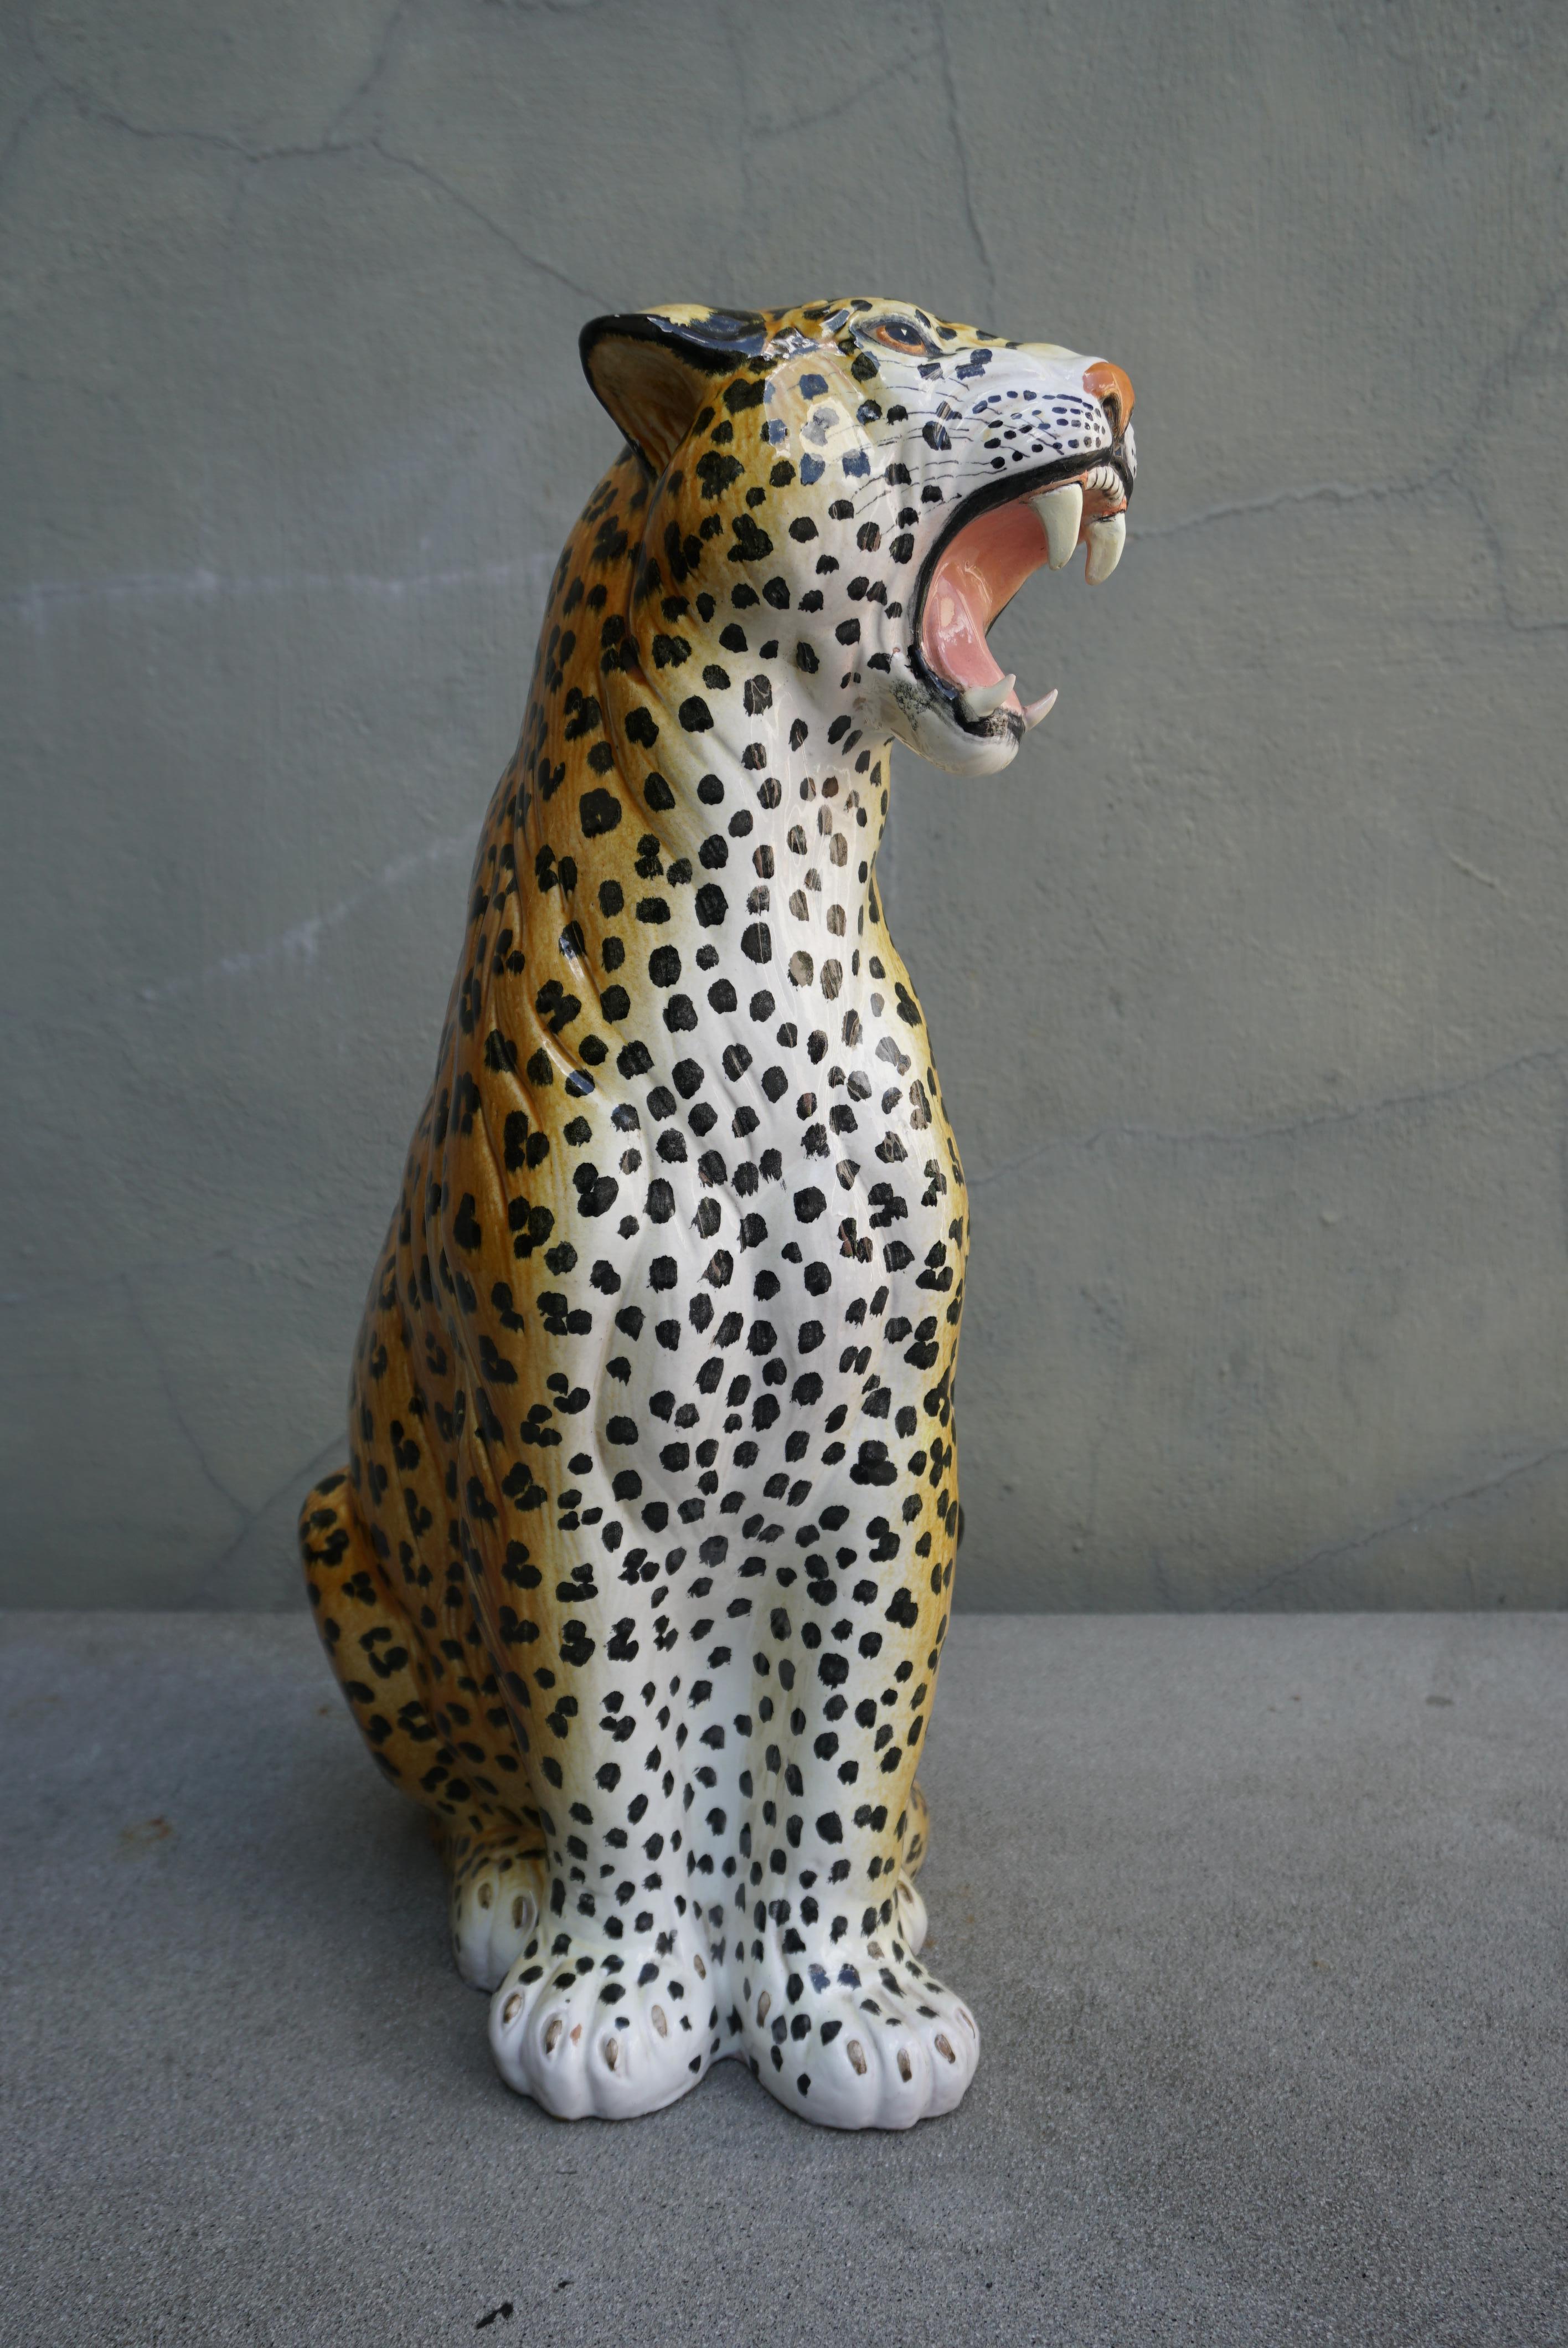 This sizable ceramic and well executed Cheetah sculpturedates to approximately 1960 and done in the period Mid-Century Modern style. The sculpture is done in a detailed molded ceramic which has been hand-painted with substantial realistic detail in